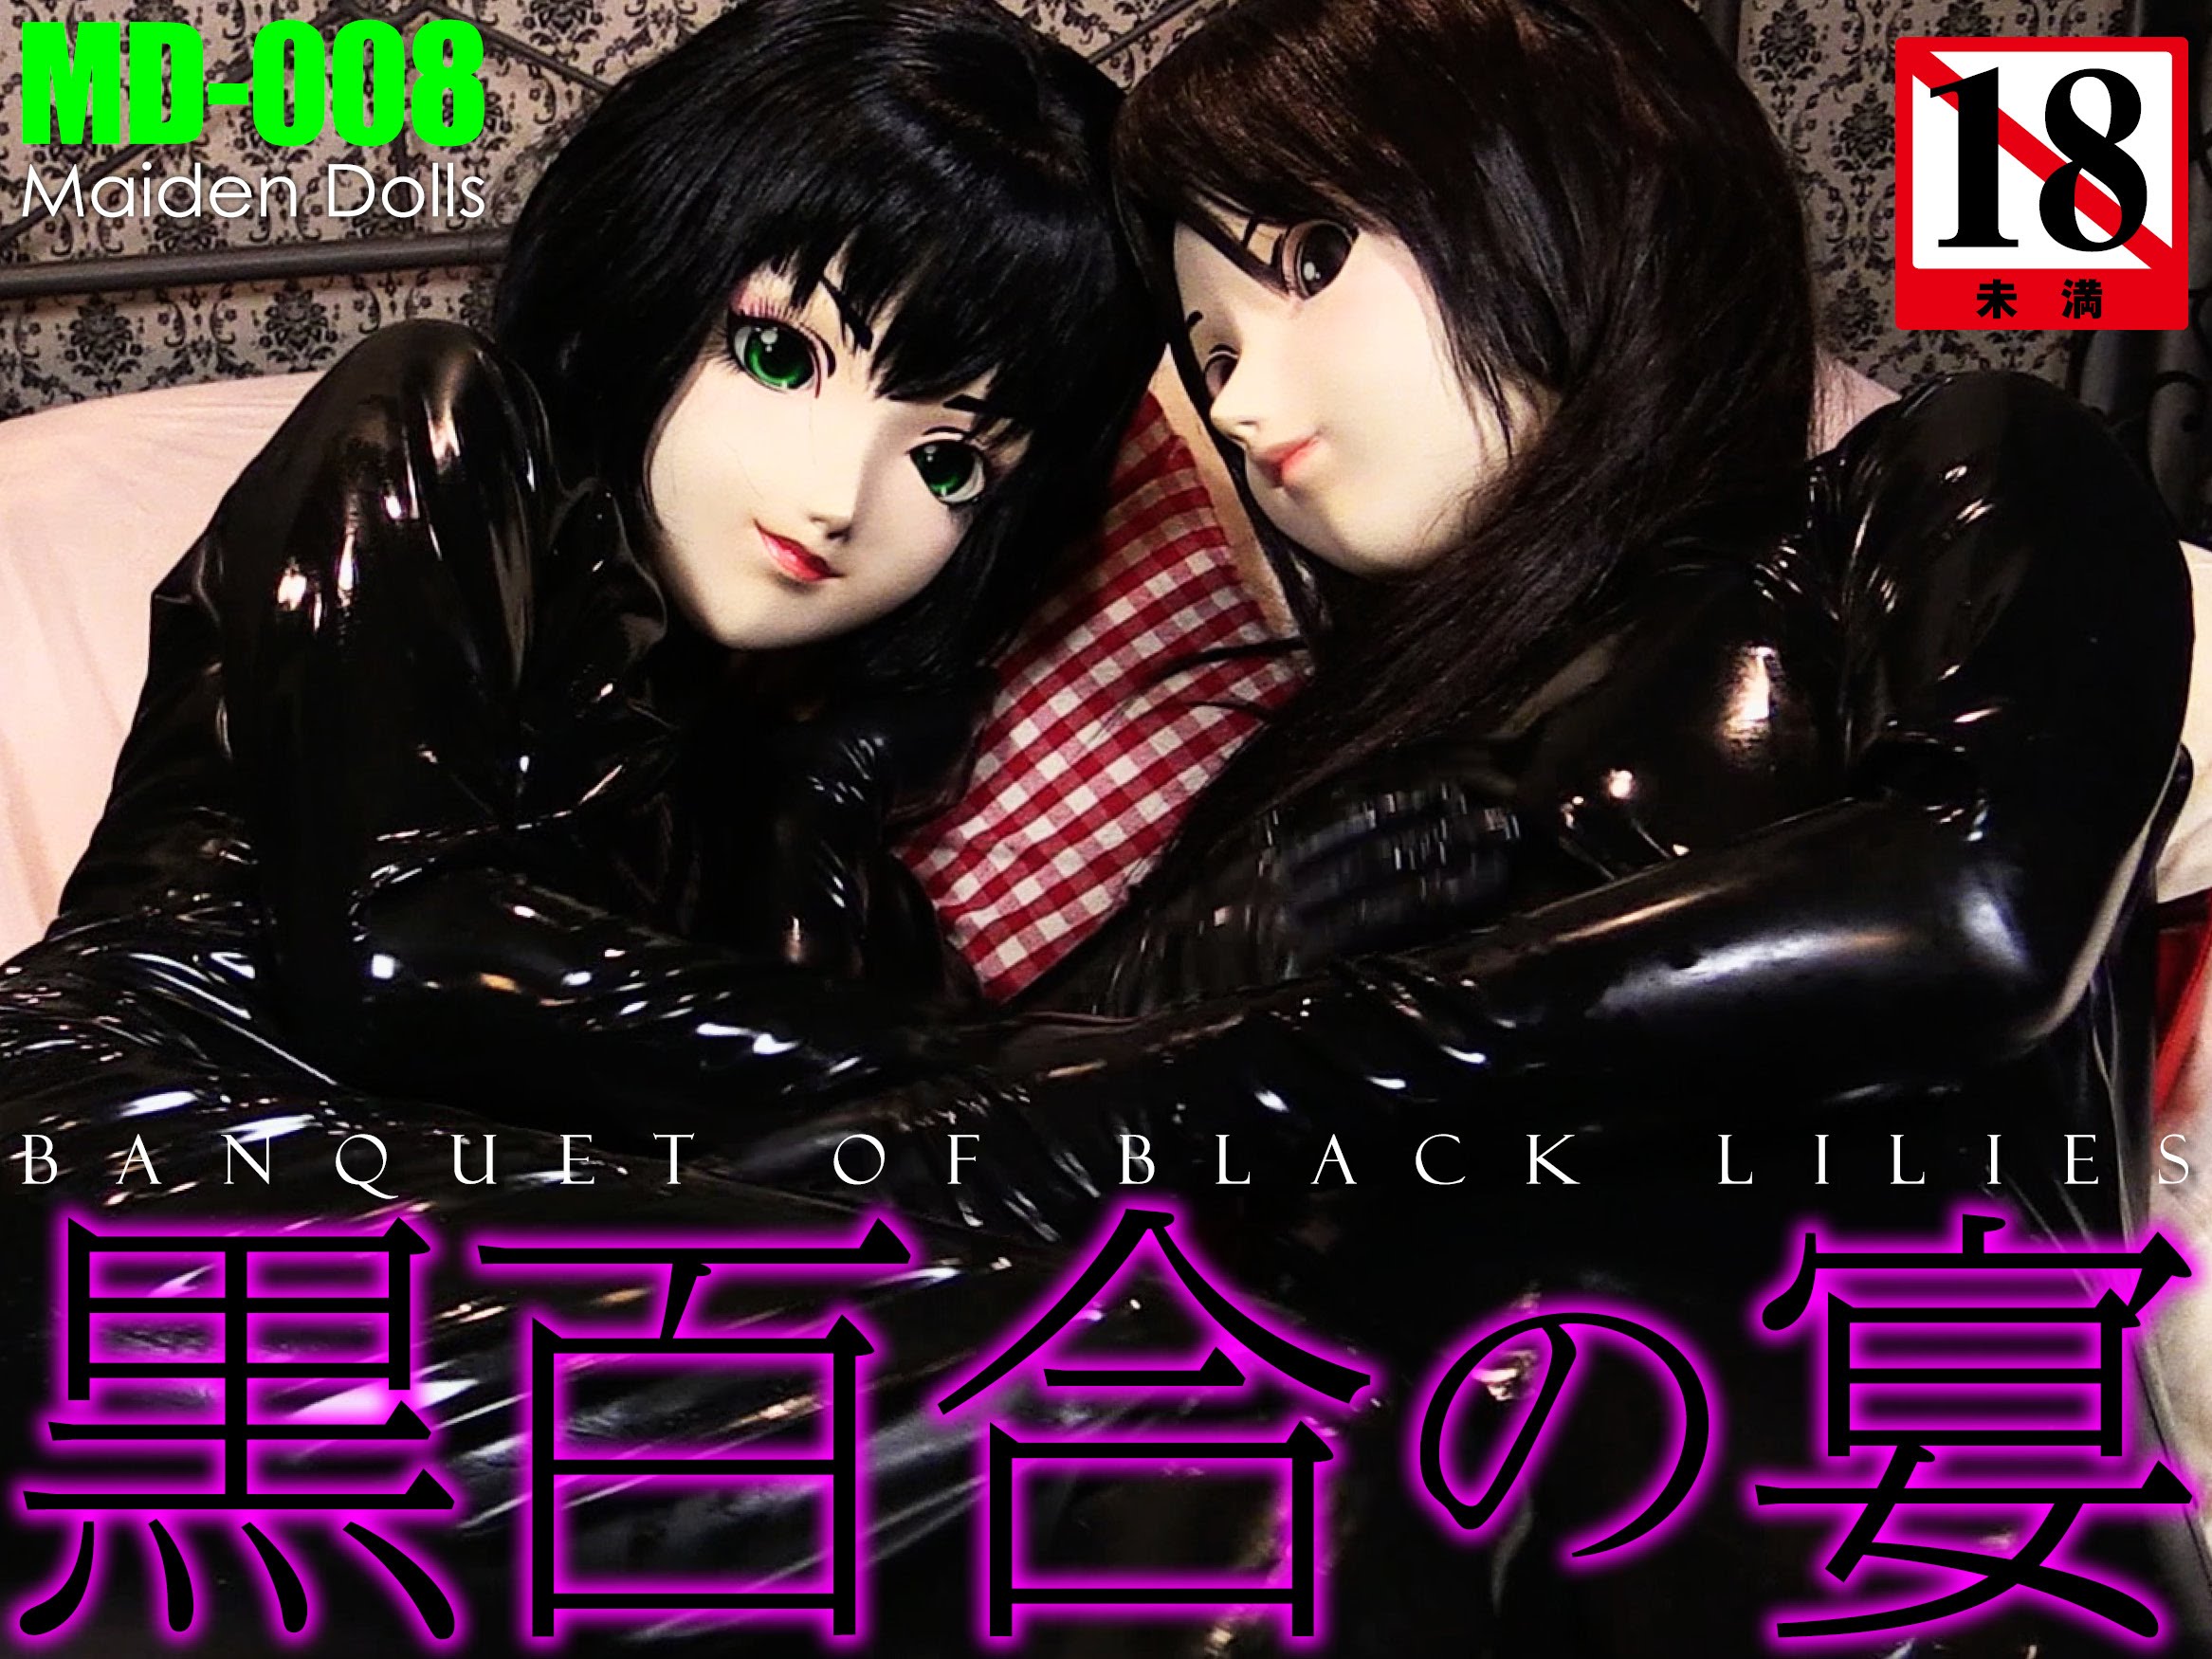 Youtube Md008 Maiden Dolls Free Download Borrow And Streaming.